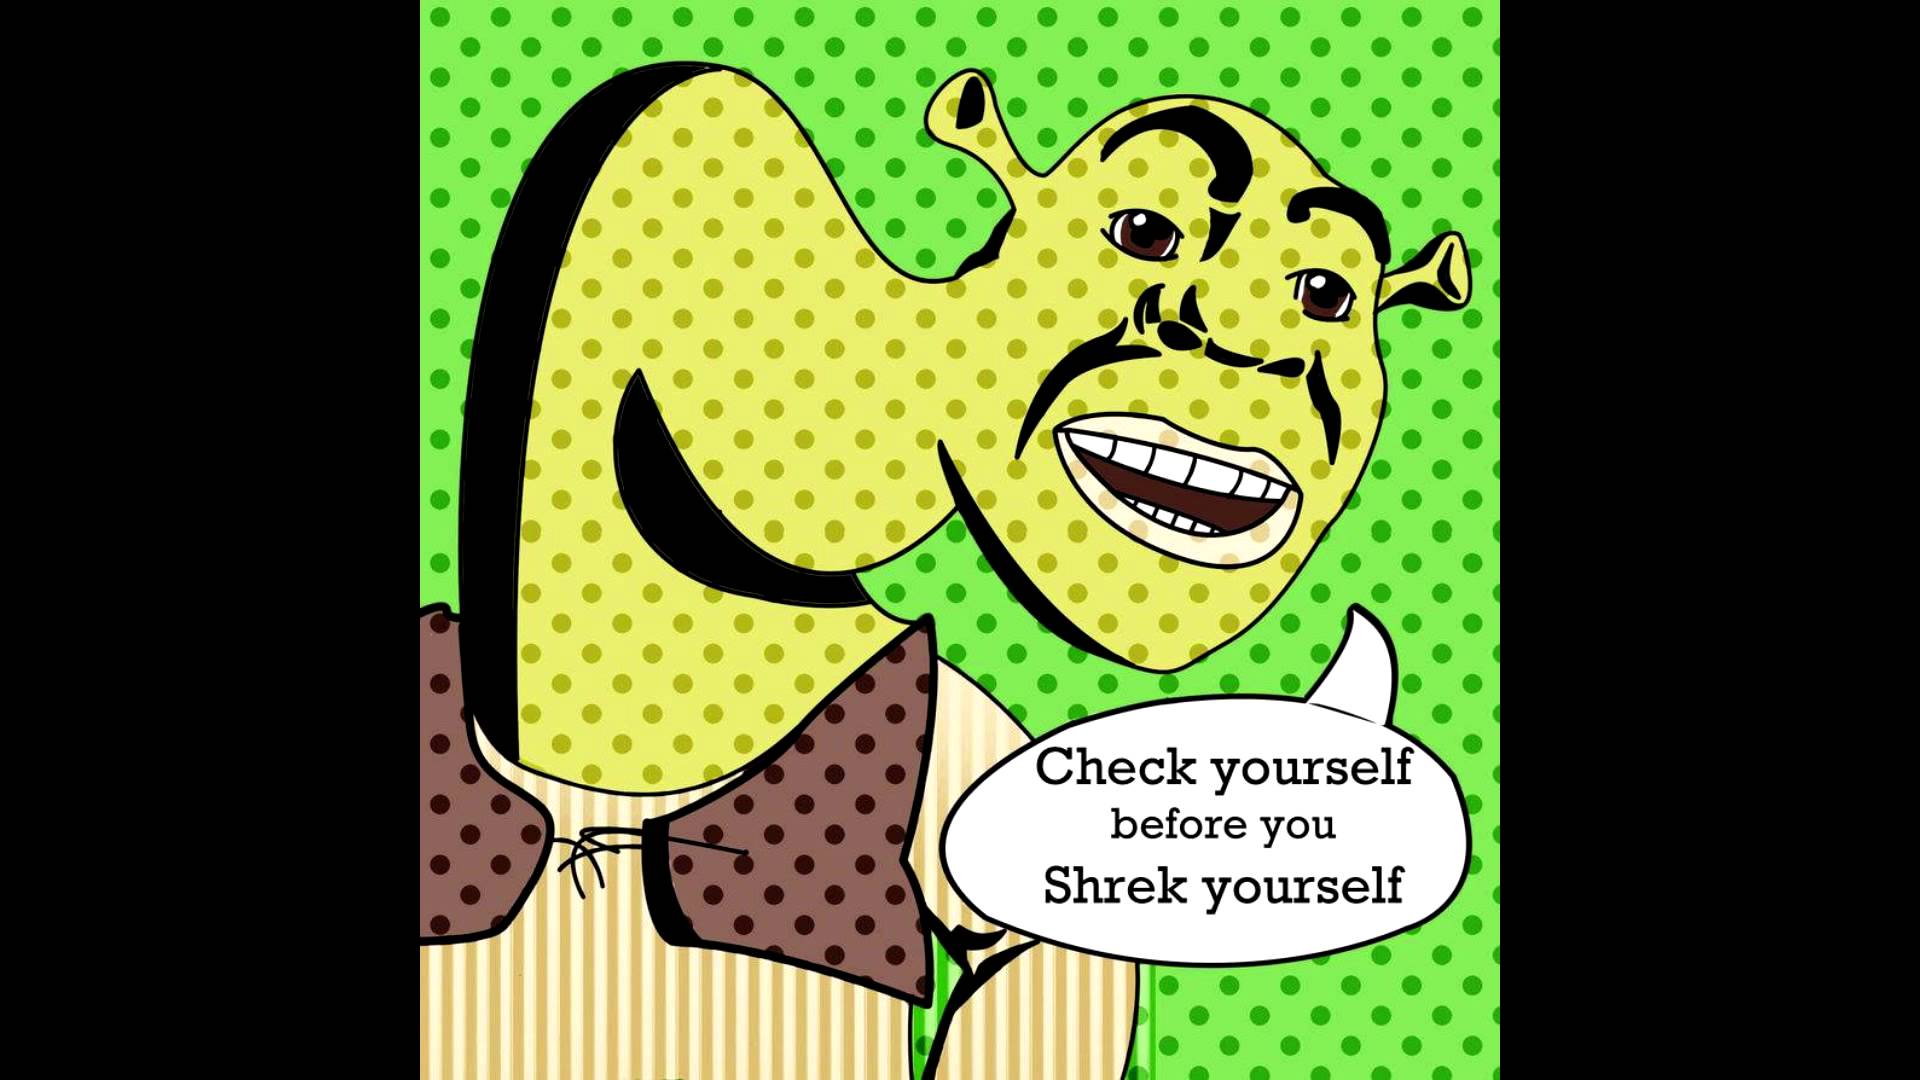 Shrek is here to be advice